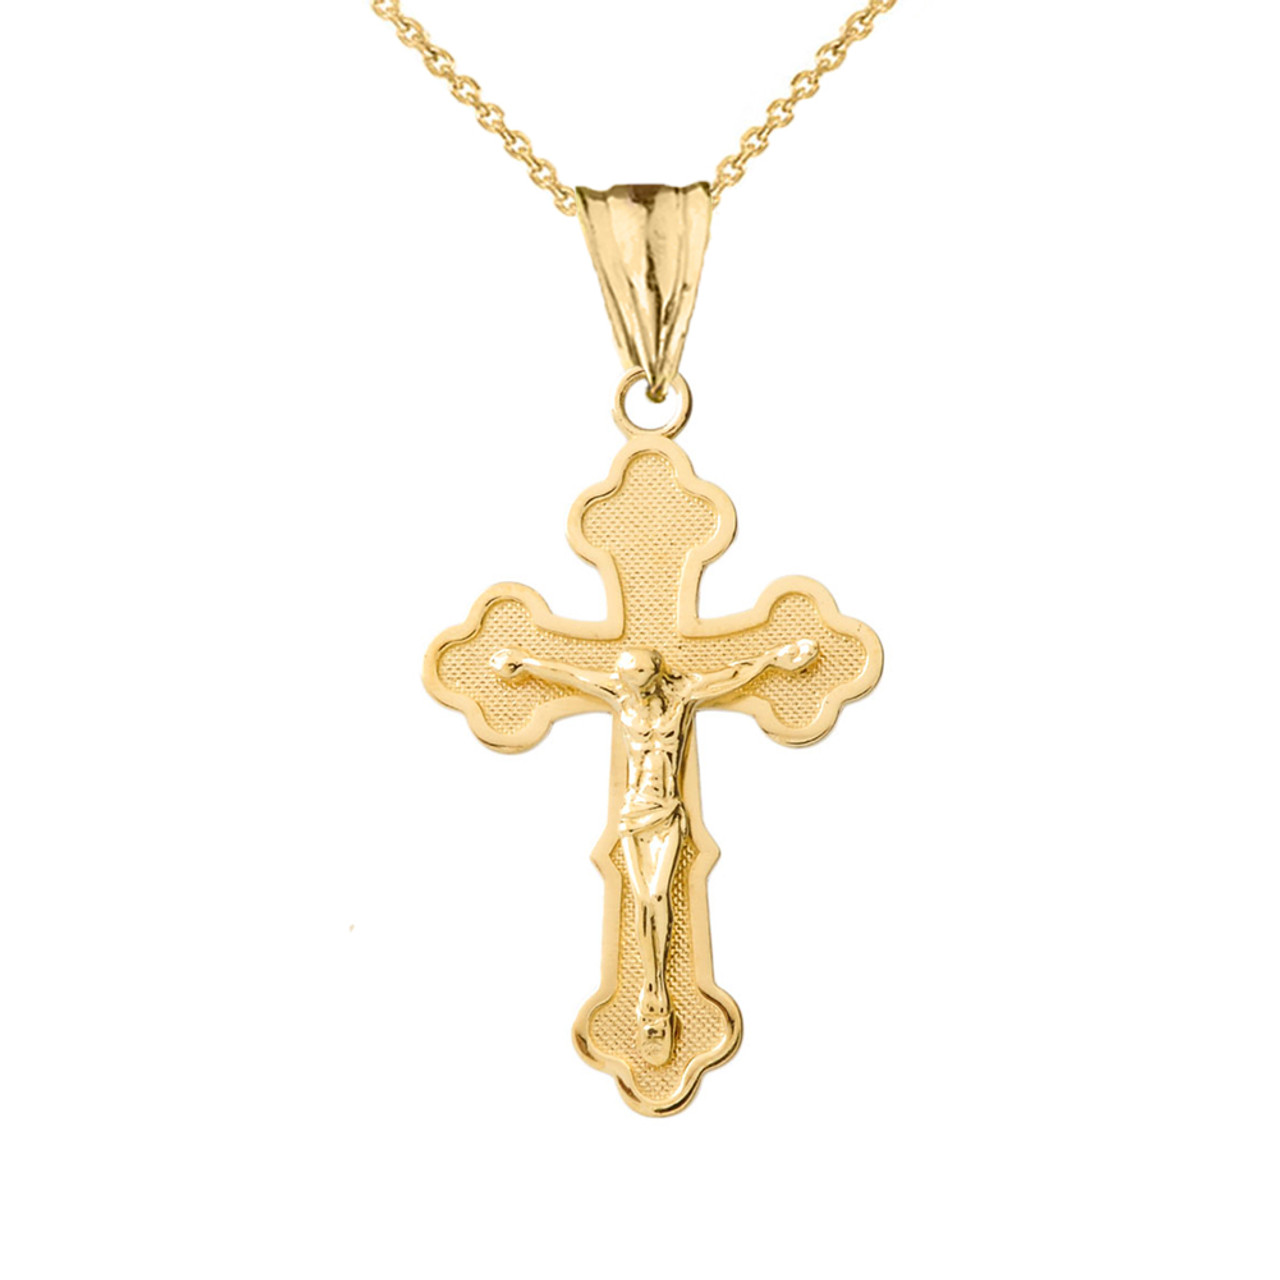 Greek Orthodox Crucifix Cross Pendant Necklace in Yellow Gold